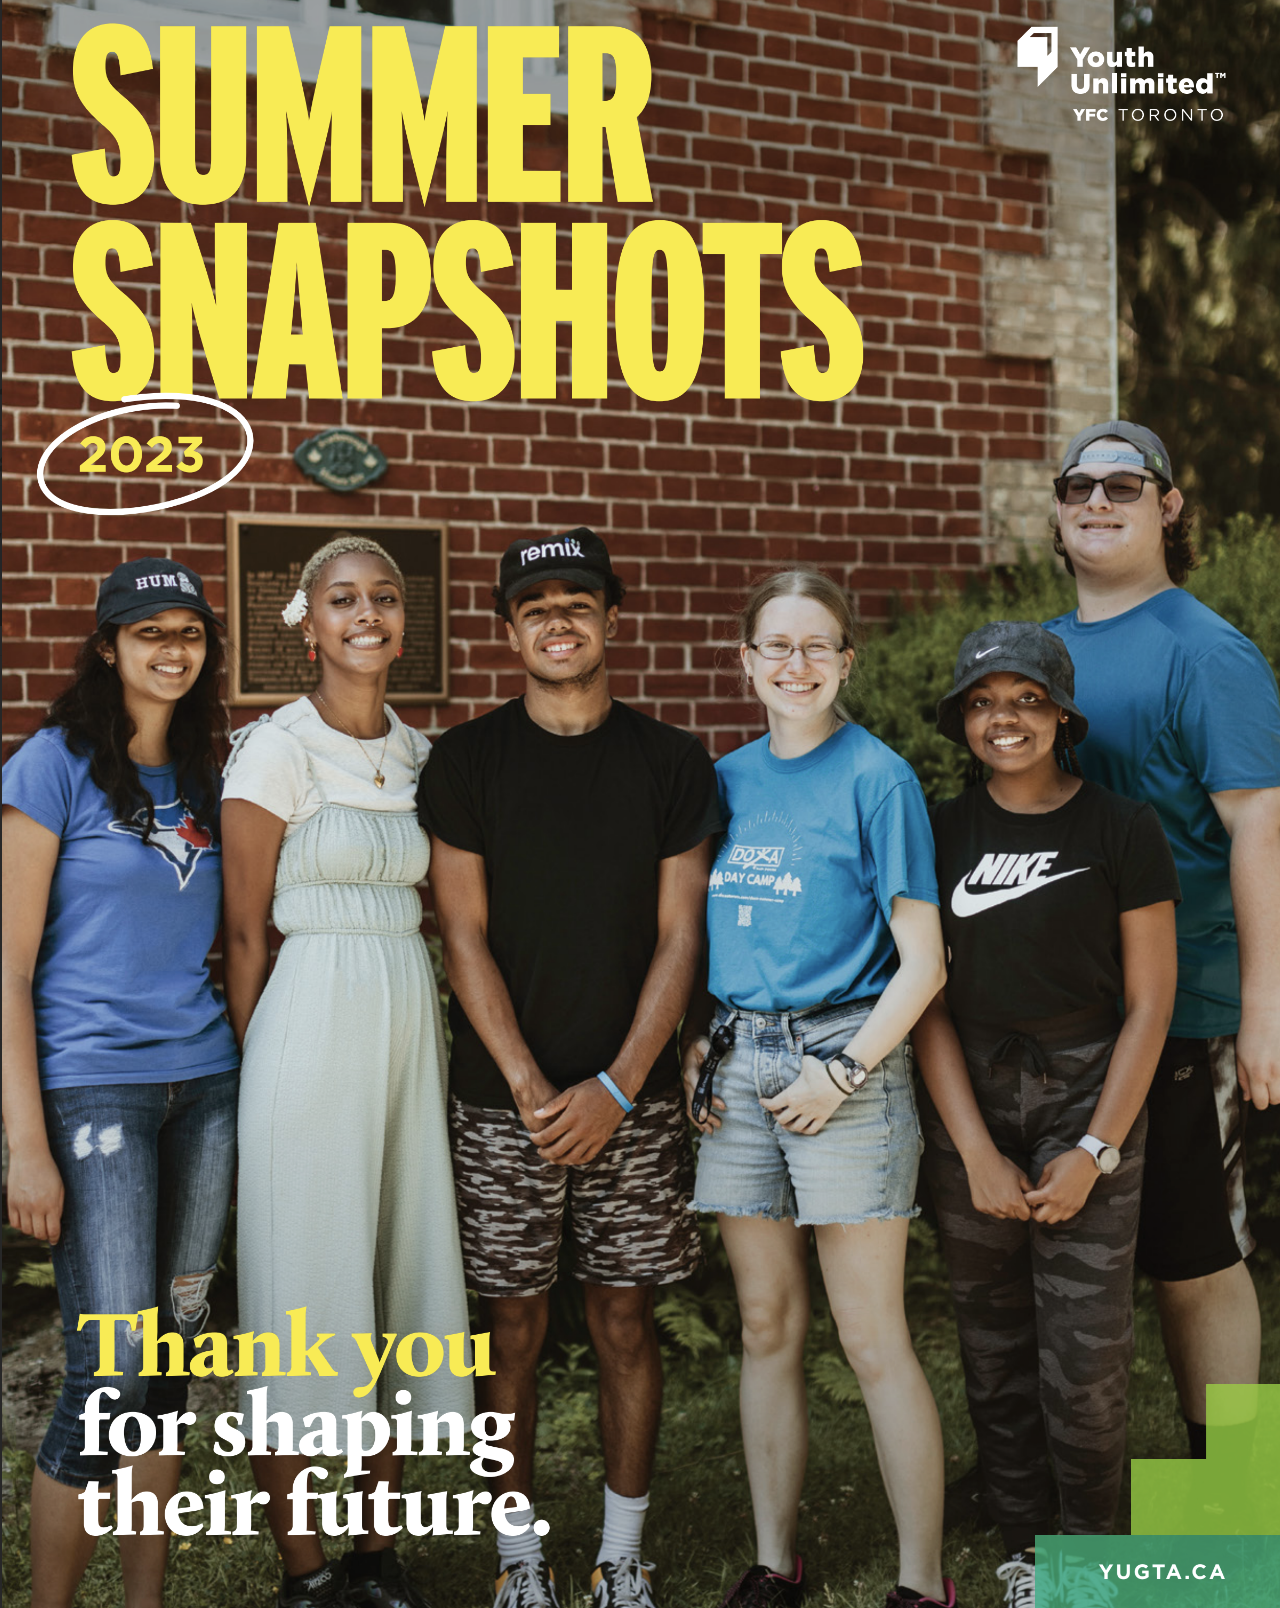 Summer Snapshots: Thank you for shaping their future